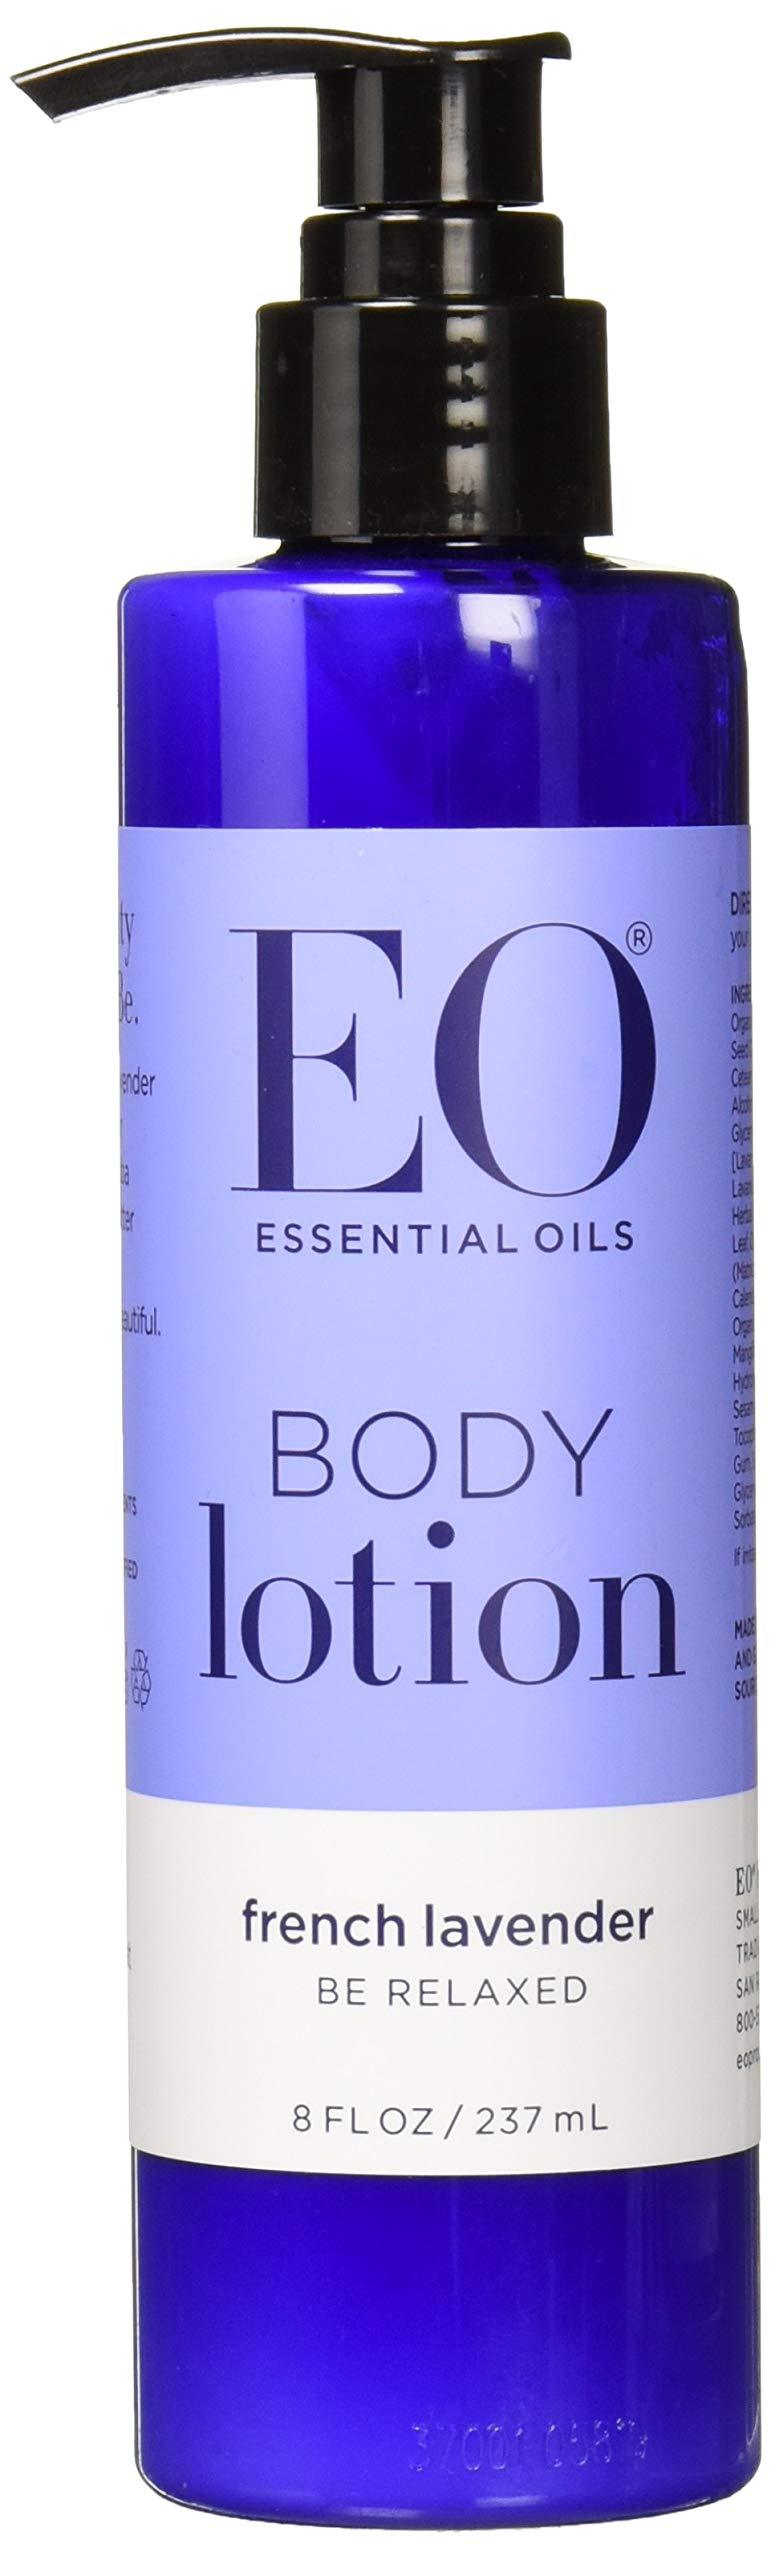 Eo Products Body Lotion,French Lavender, 8 fz, 2 pack French Lavender 8 Fl Oz (Pack of 2) - BeesActive Australia